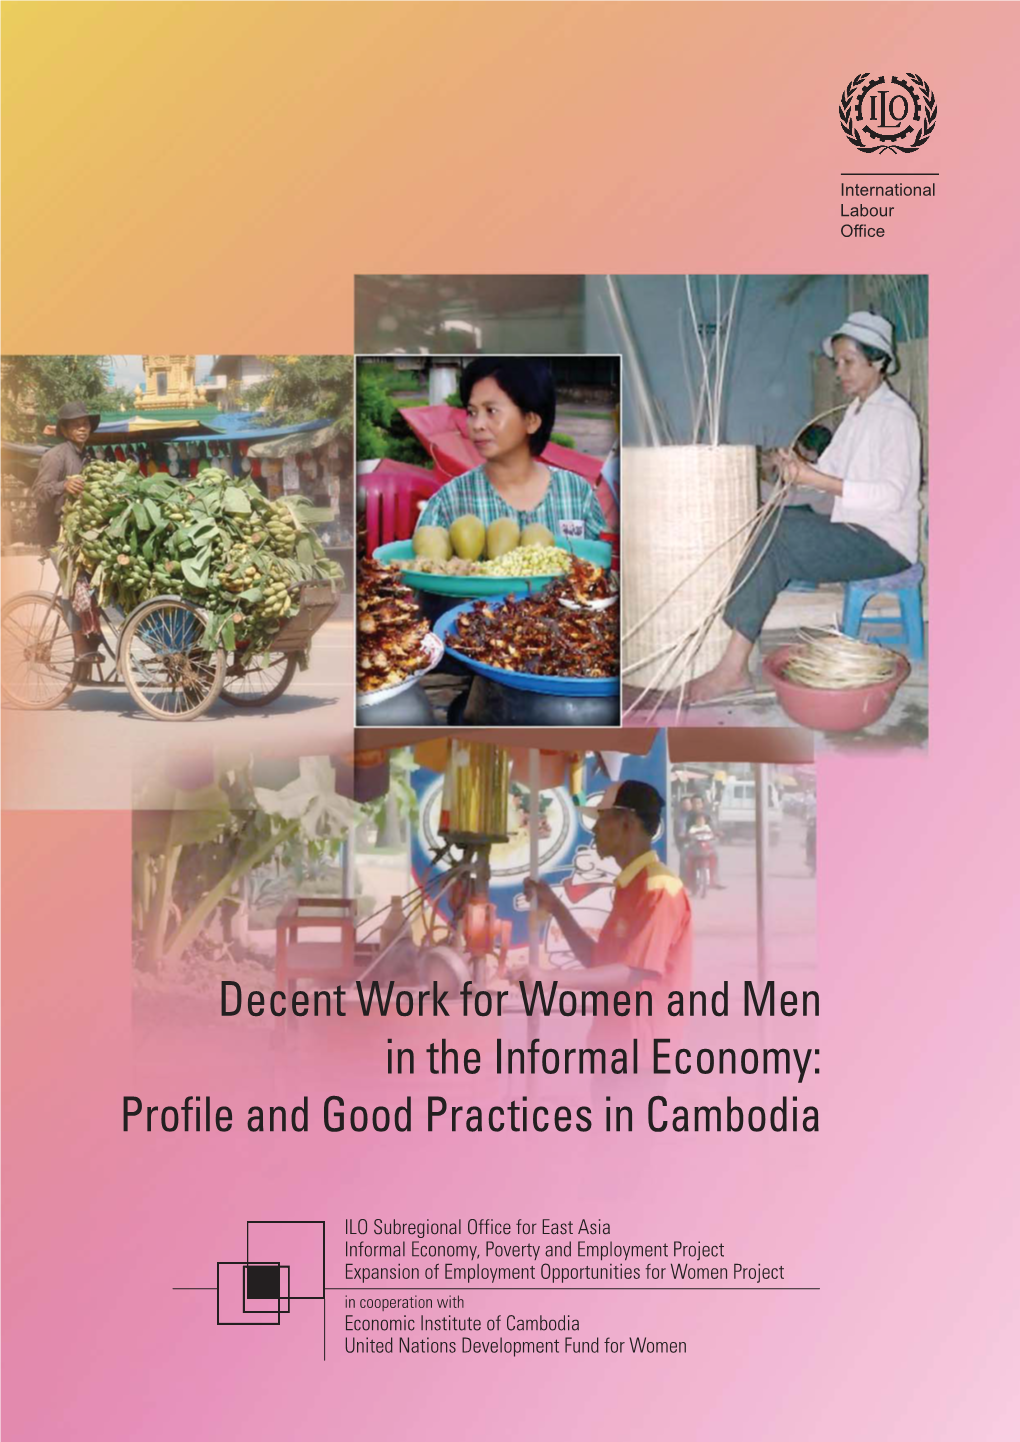 Decent Work for Women and Men in the Informal Economy: Profile and Good Practices in Cambodia